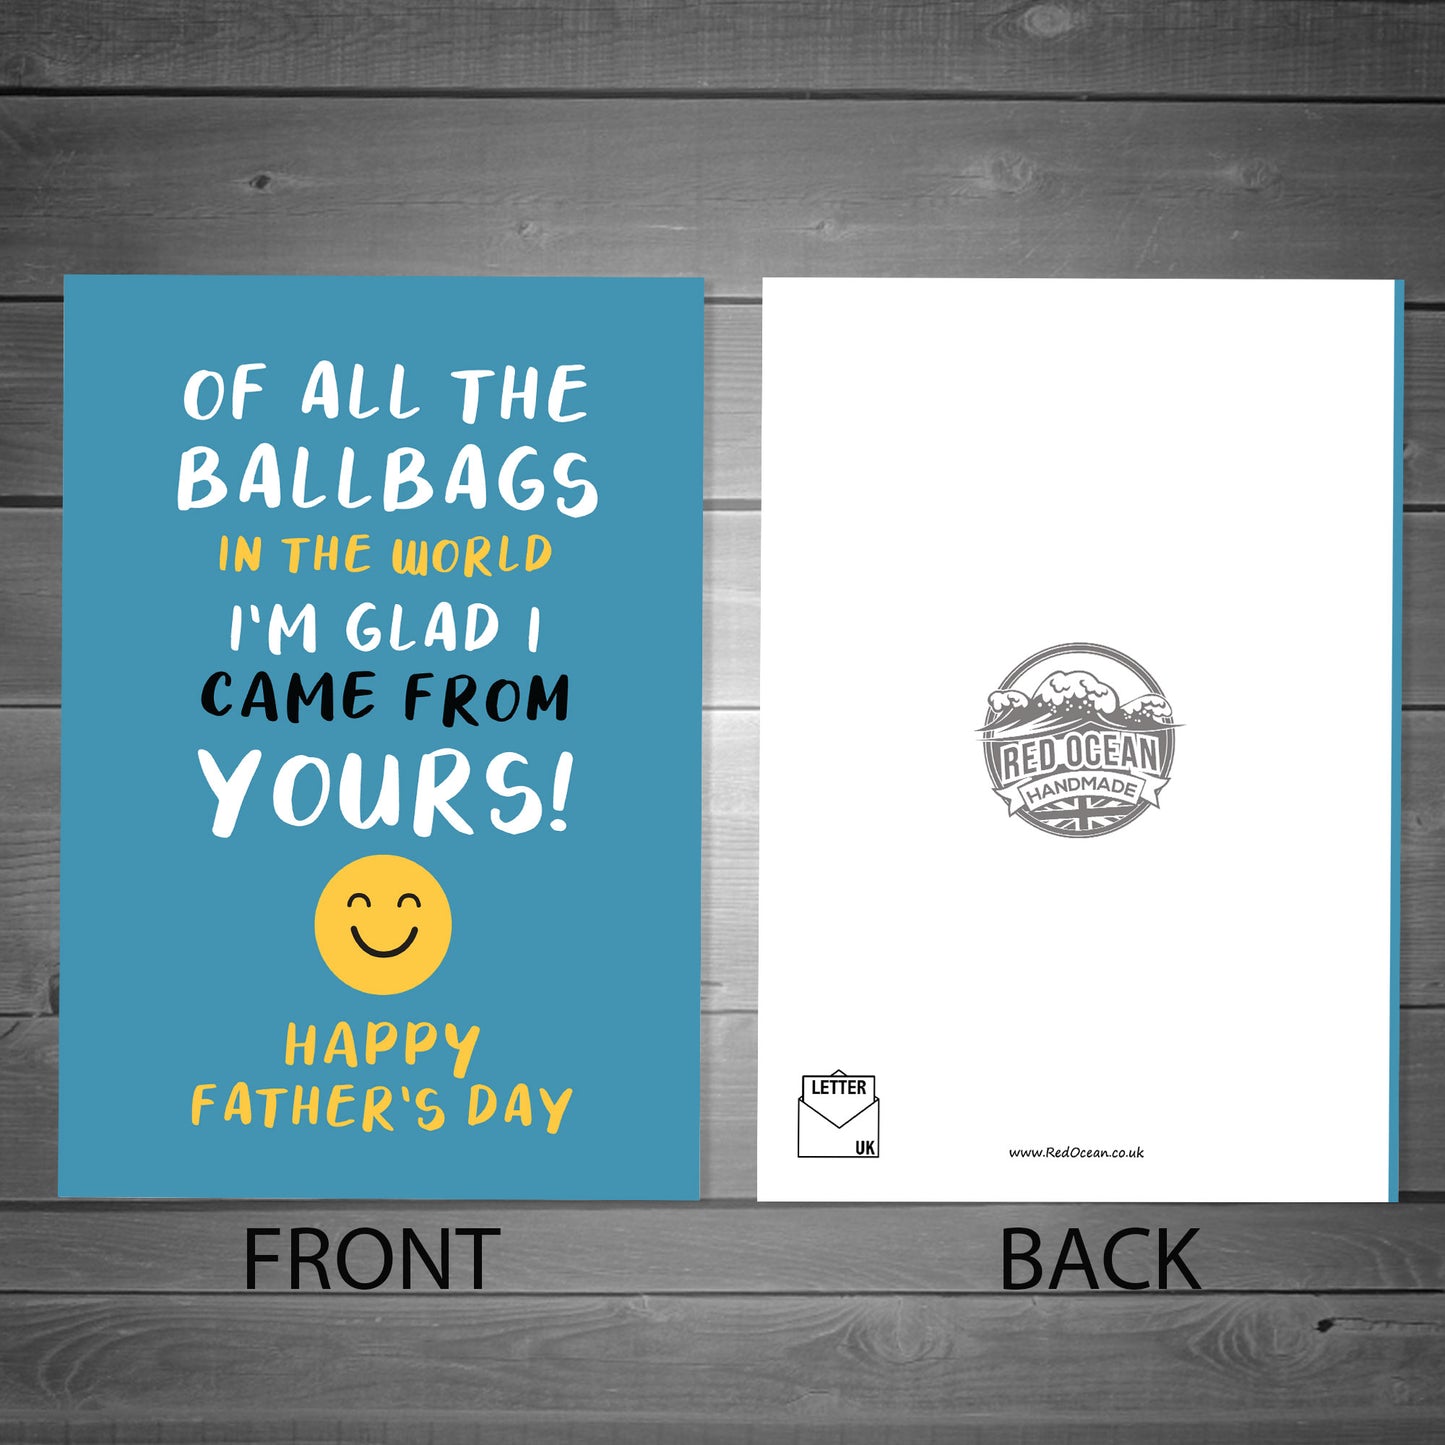 Funny Rude Fathers Day Card A6 Card For Dad On Fathers Day